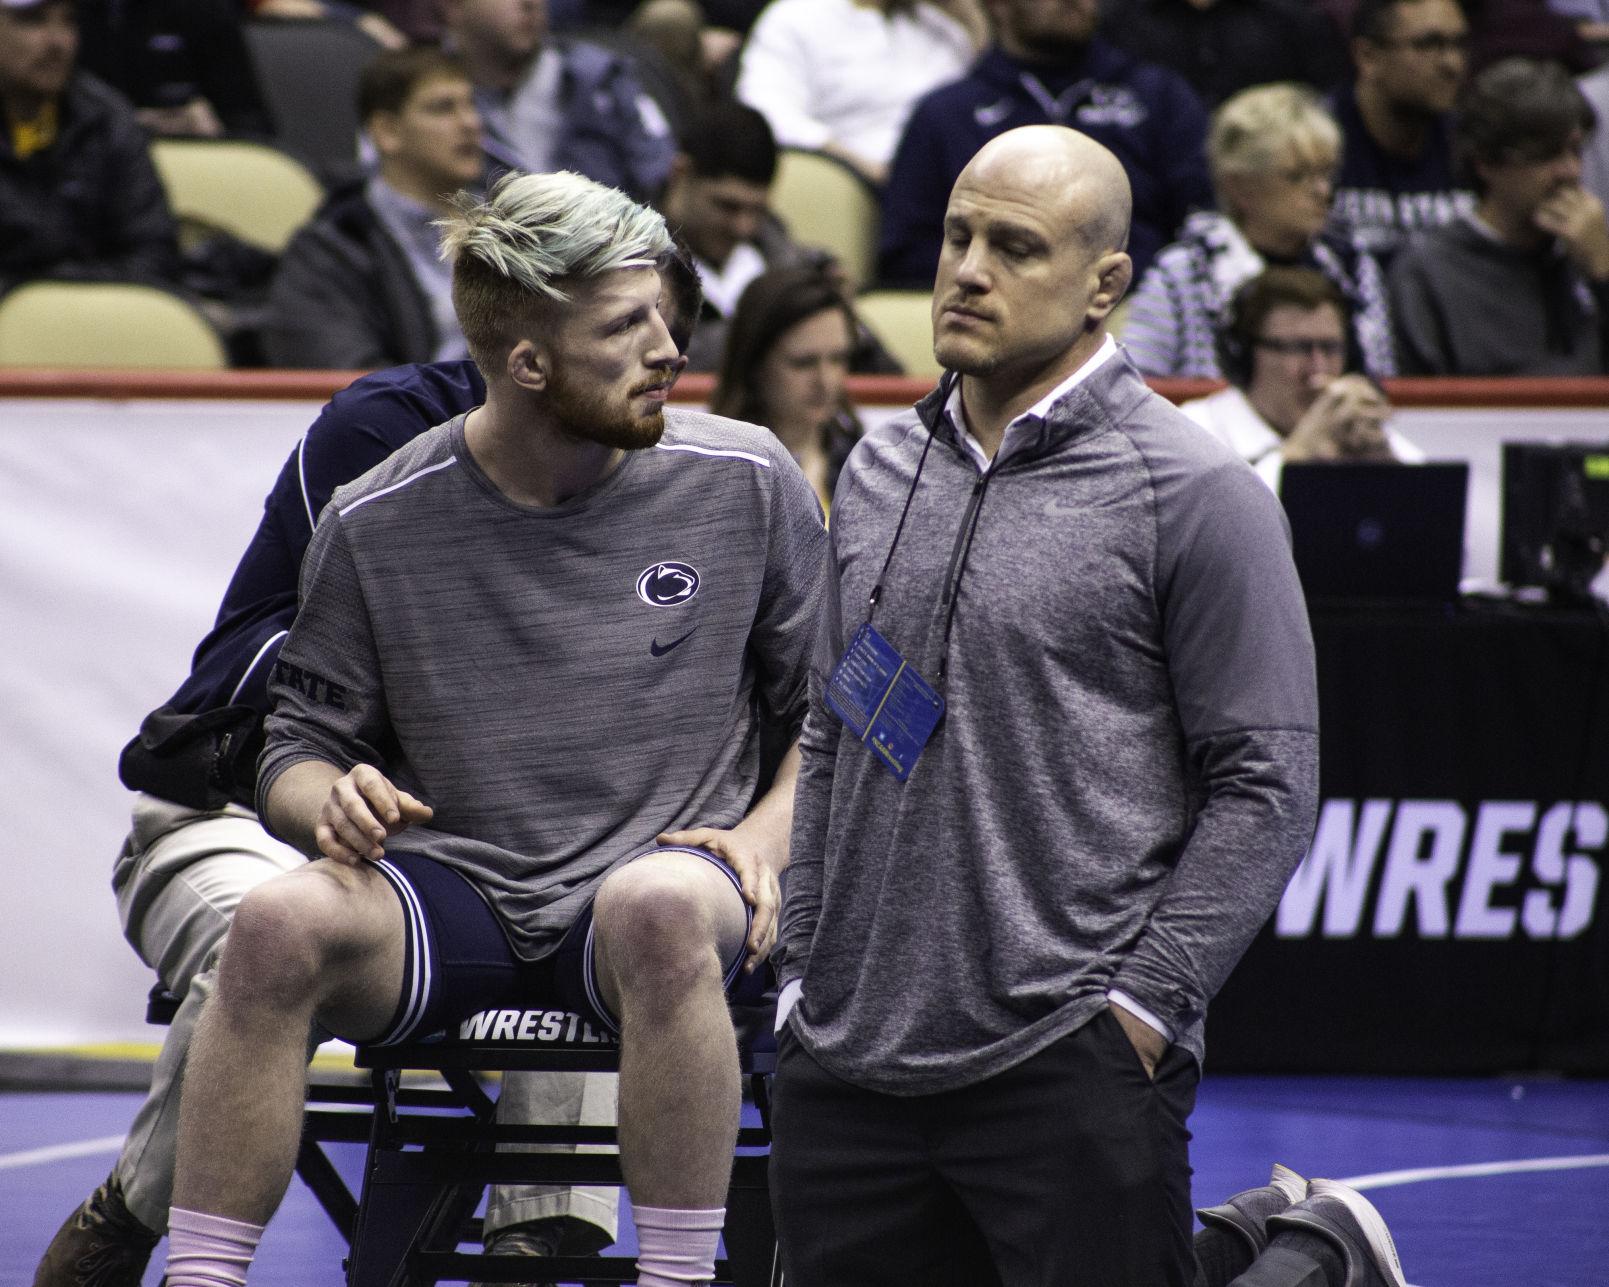 Former Penn State wrestler Bo Nickal reveals plans about his MMA future